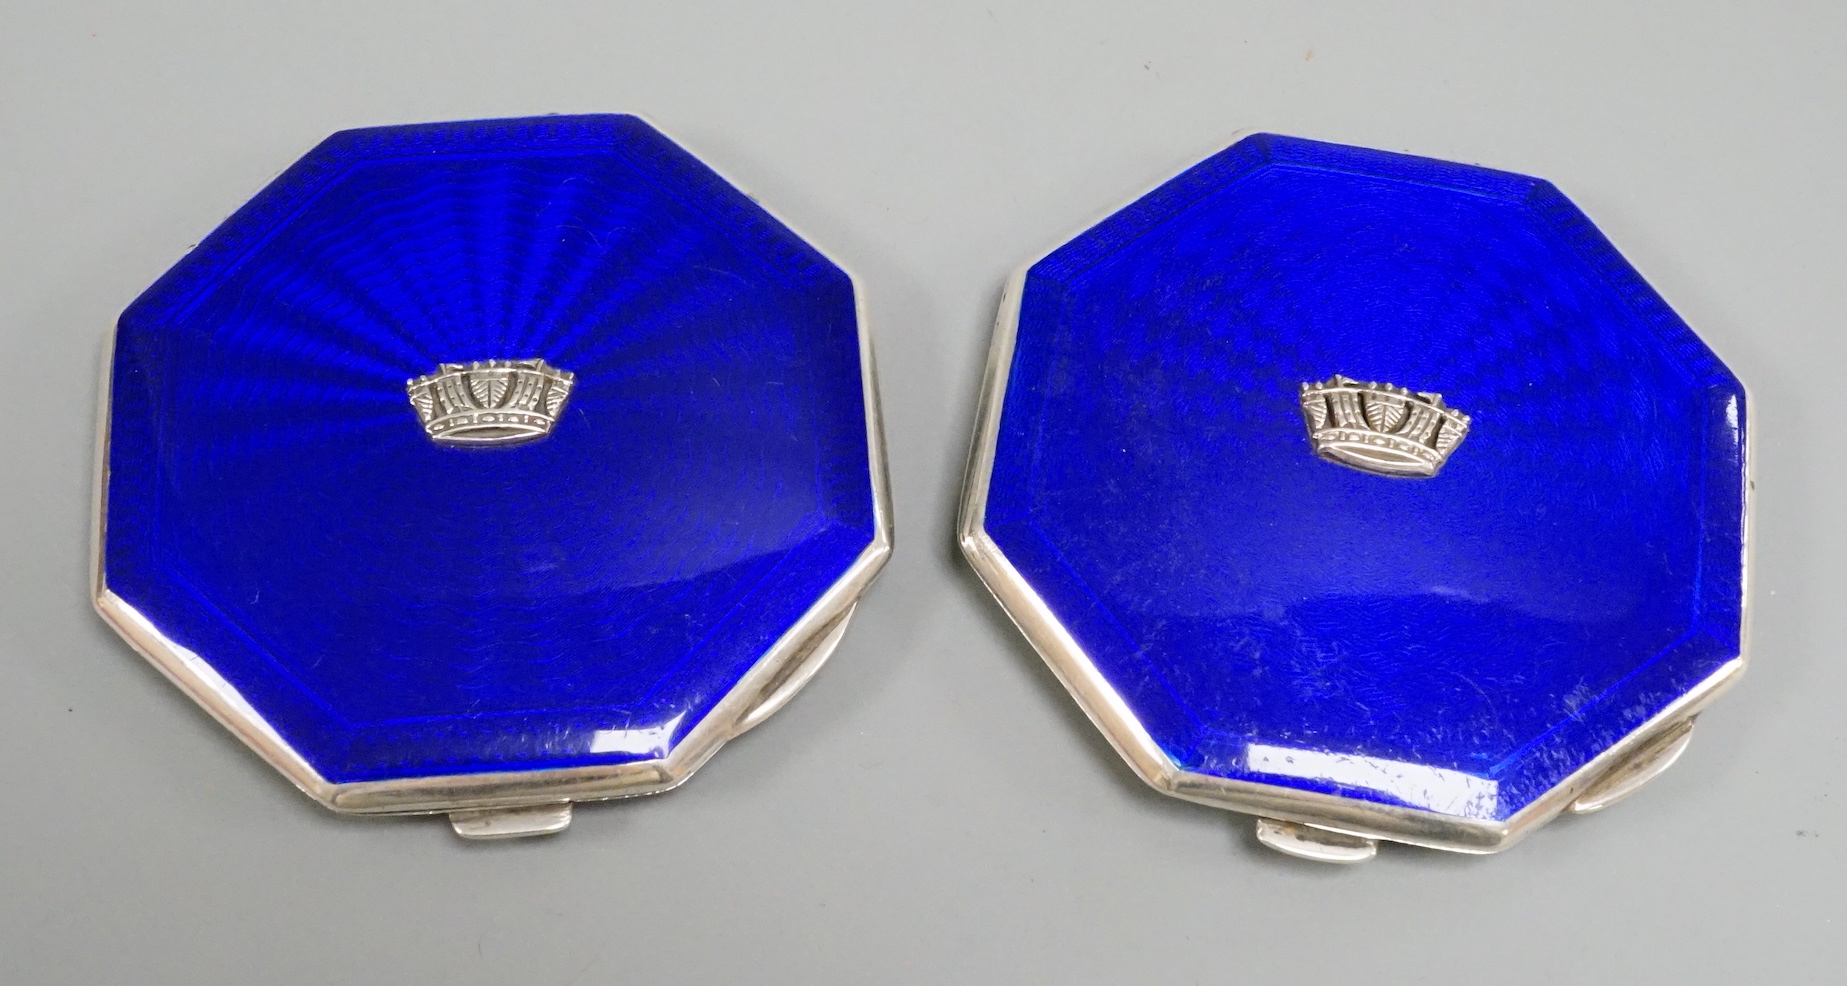 A pair of George VI part engine turned silver and enamel octagonal compacts, with coronet appliqués, John William Barrett, Birmingham, 1941, 77mm.